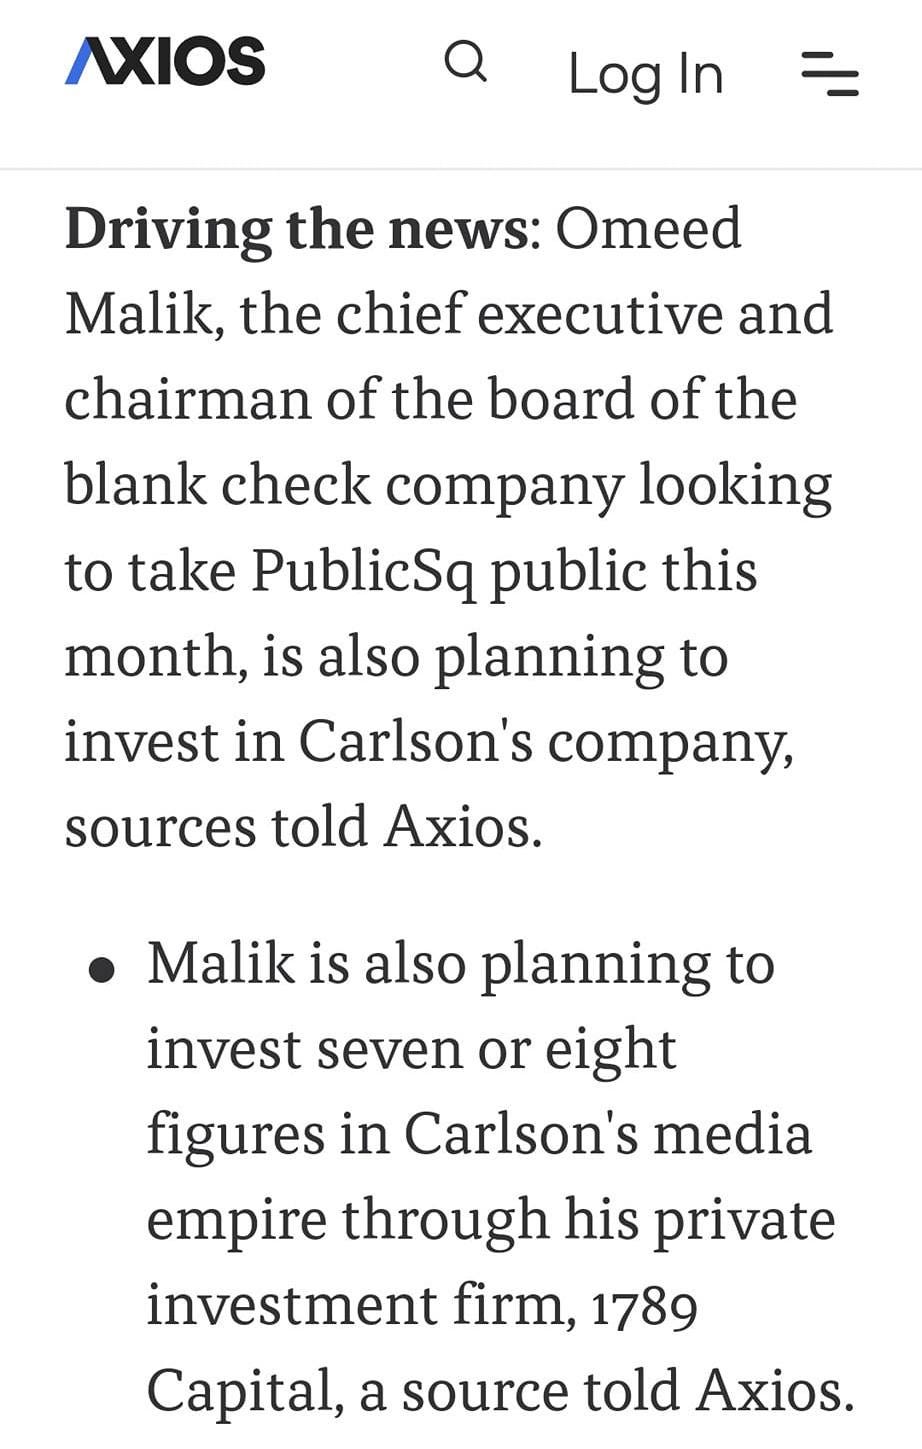 May be an image of text that says '8:58 48% AXIOS Log LogIn In Driving the news: Omeed Malik, the chief executive and chairman of the board of the blank check company looking to take PublicSq public this month, is also planning to invest in Carlson's company, sources told Axios. Malik is also planning to invest seven or eight figures in Carlson's media empire through his private investment firm, 1789 Capital, a source told Axios. 1789 Capital focuses investments in companies that support the "Replication/Parallel'